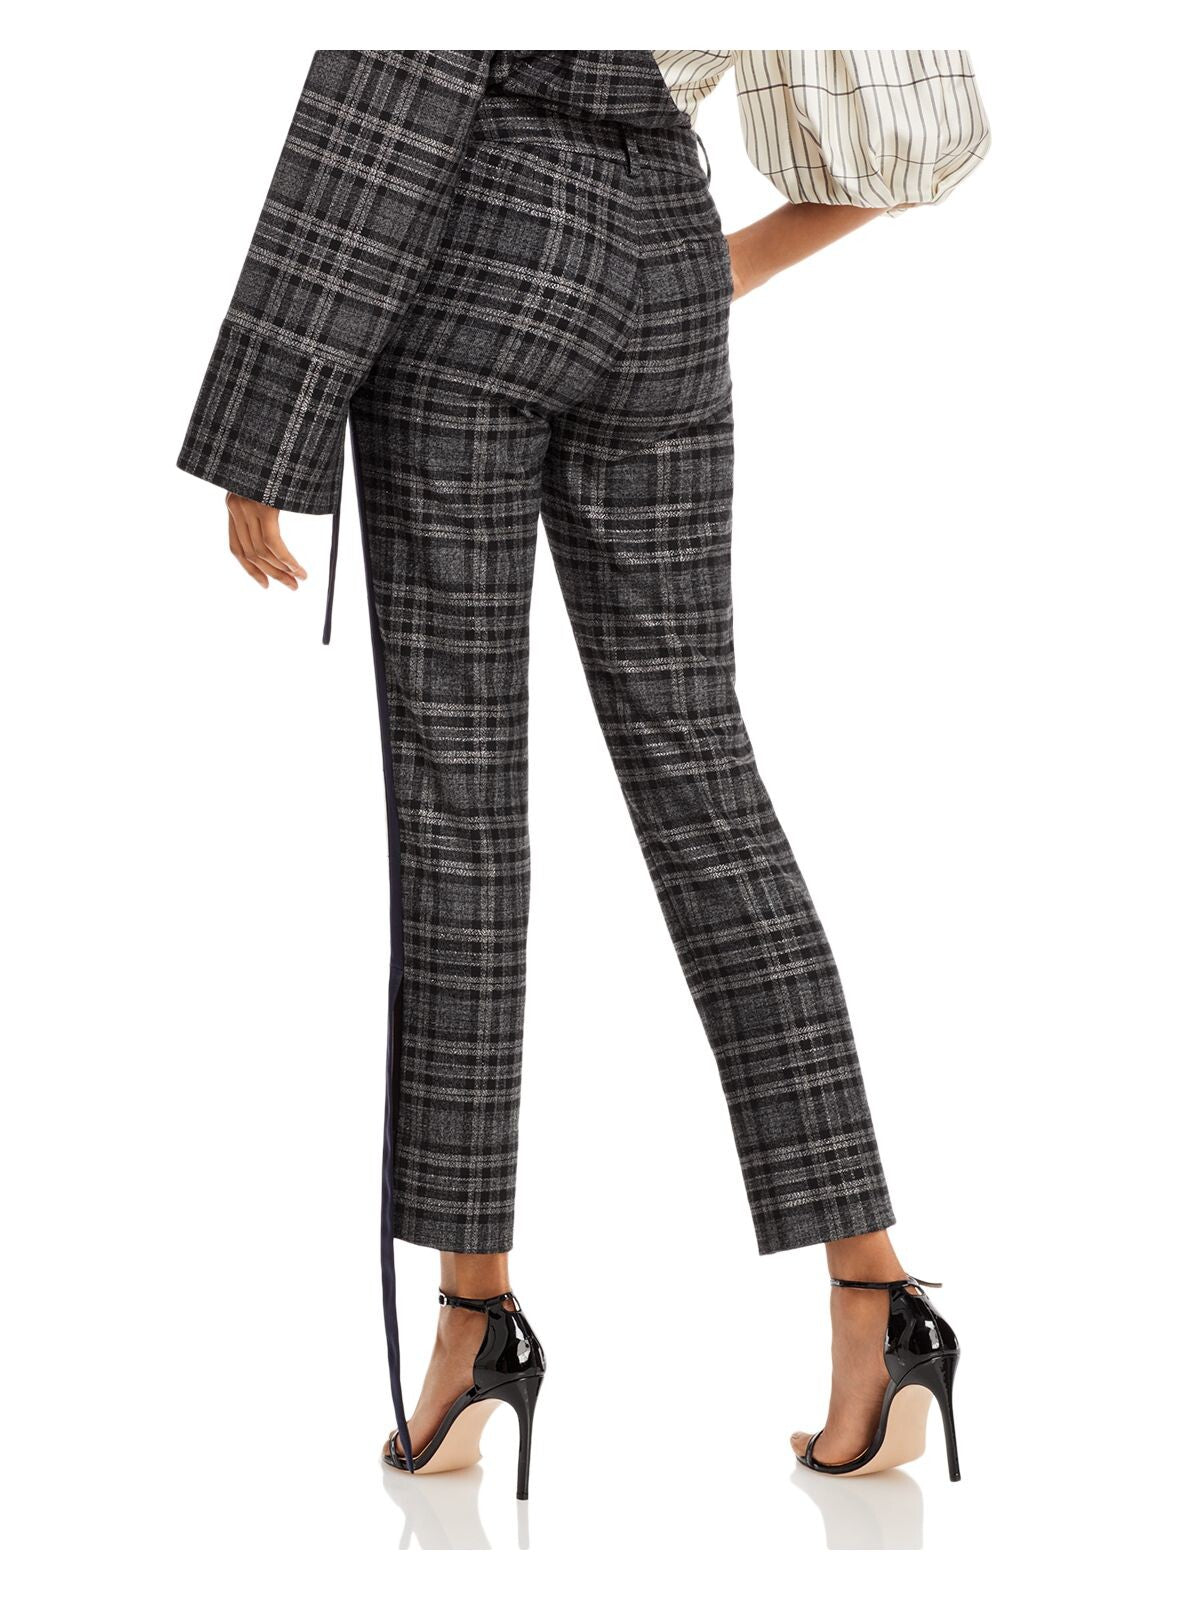 HELLESSY Womens Black Pocketed Zippered Tie Accents Metallic Plaid Straight leg Pants 4